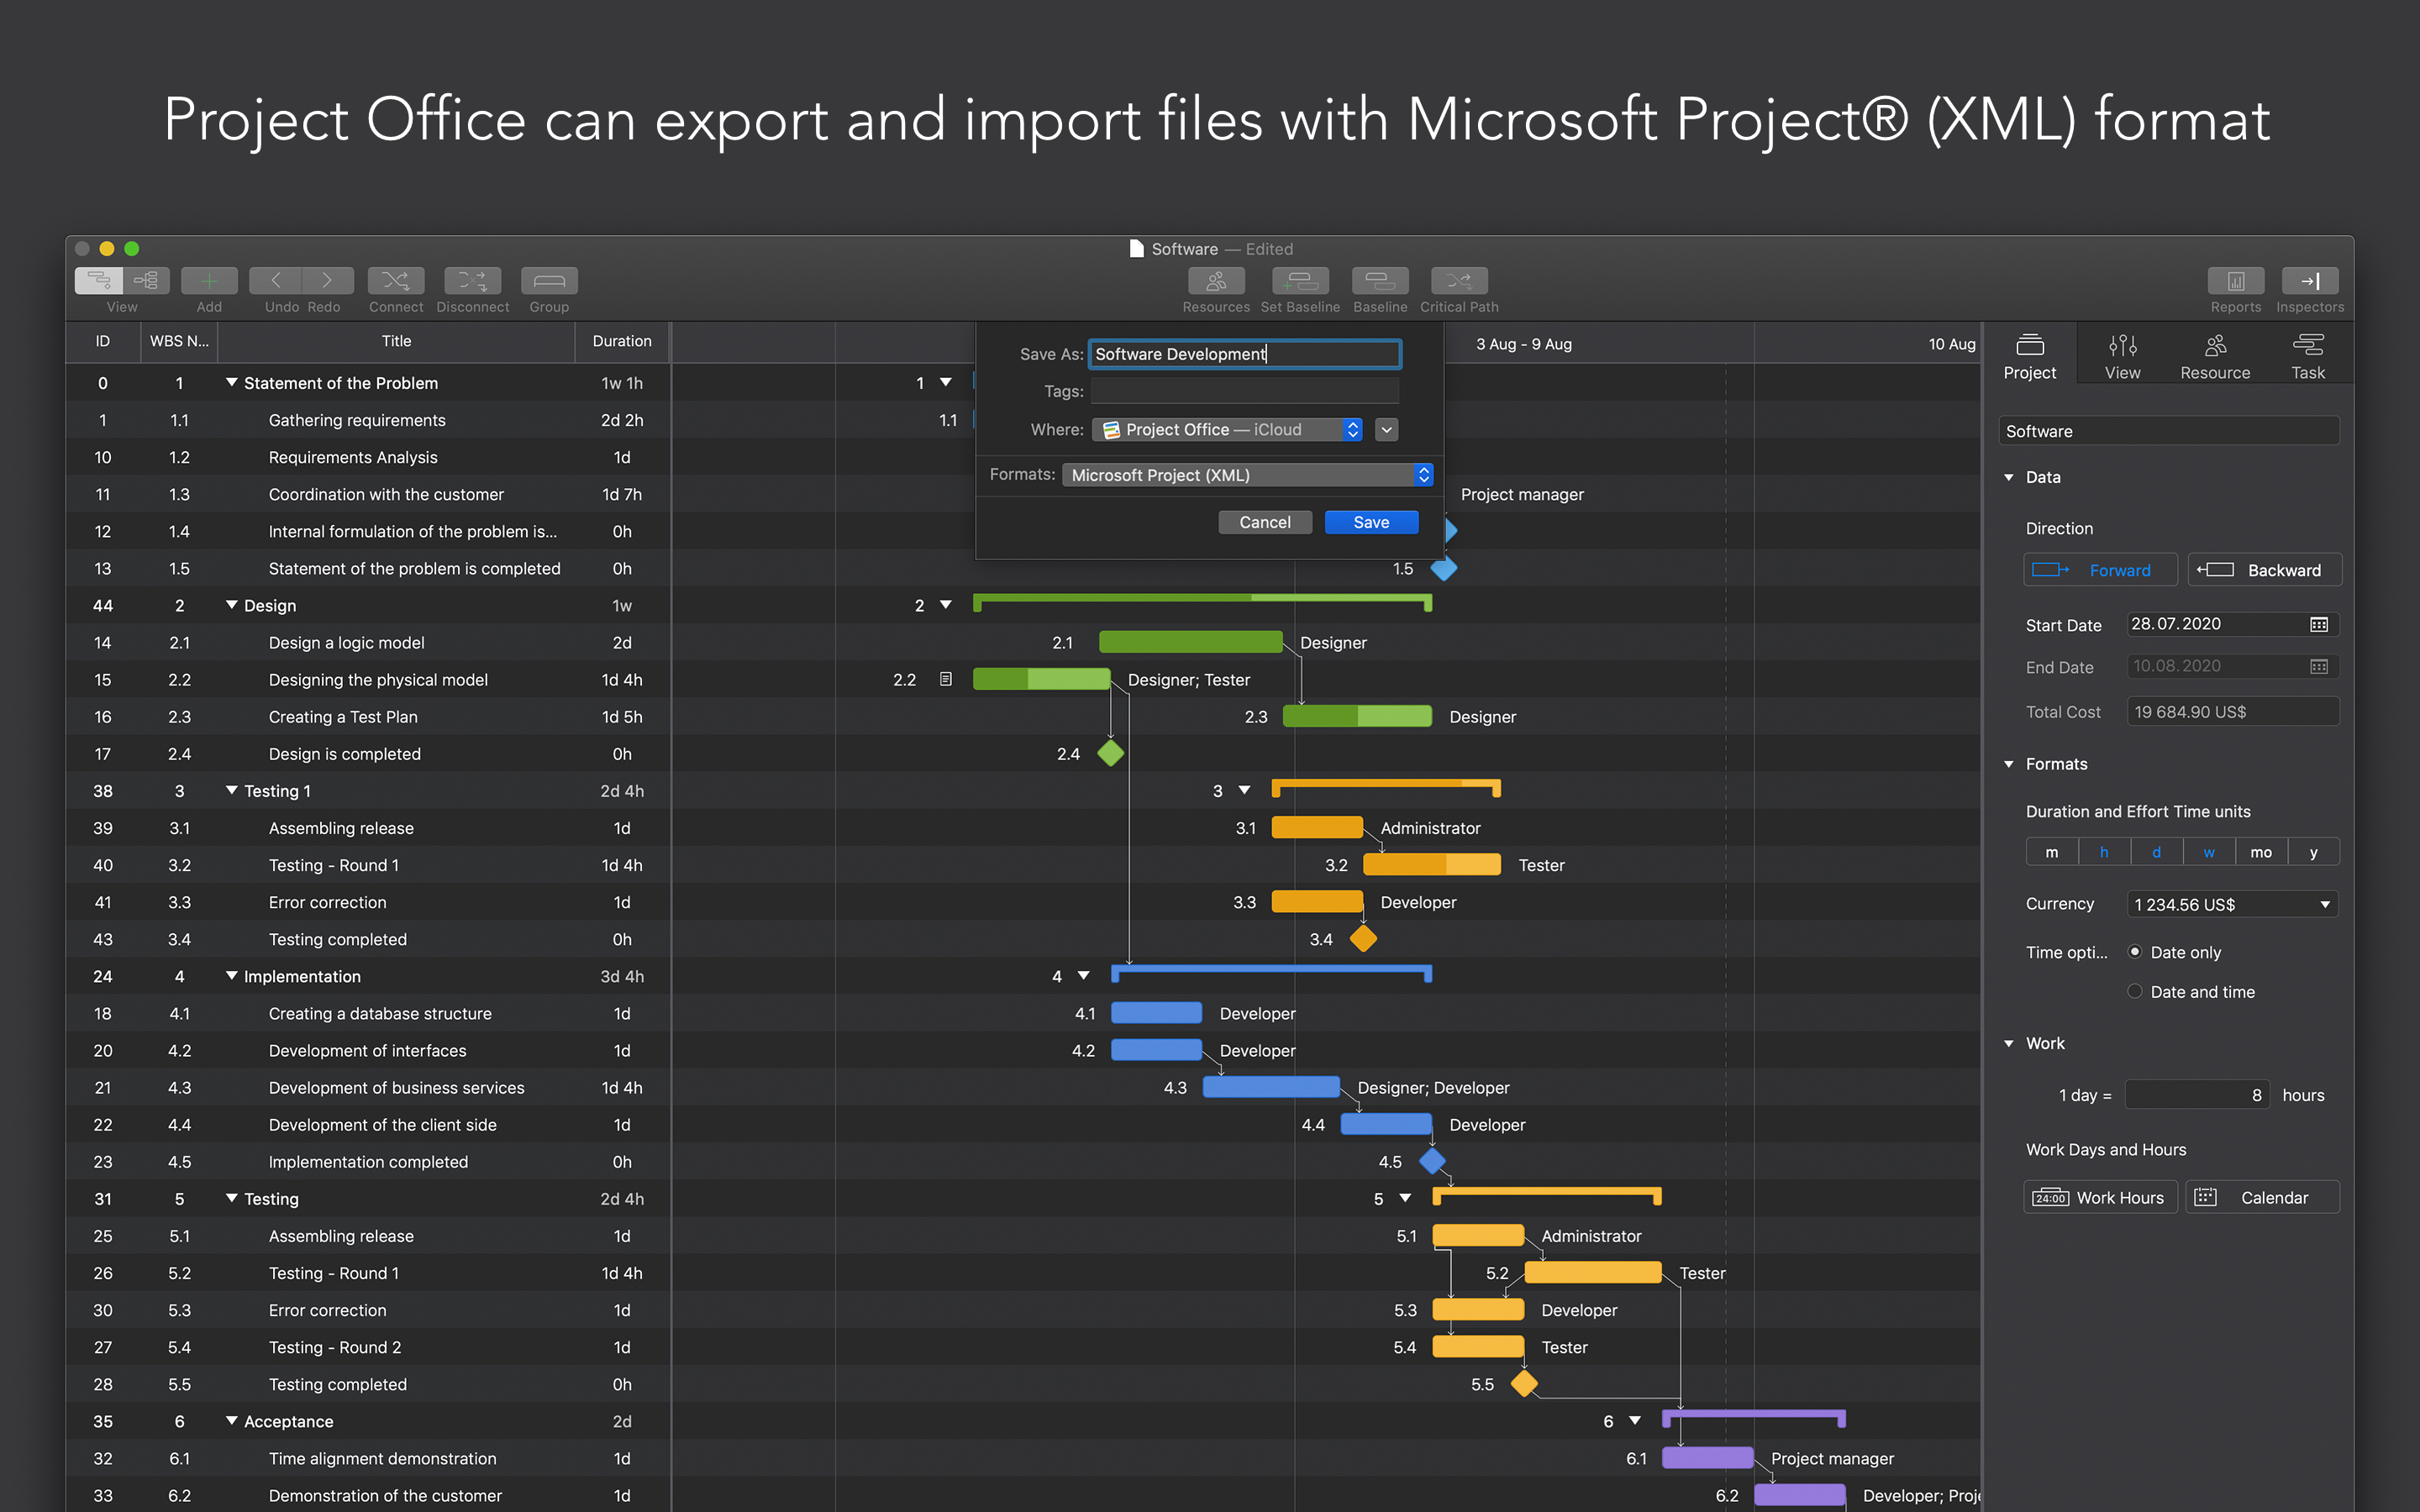 Project Office can export and import files with Microsoft Project® (XML) format.